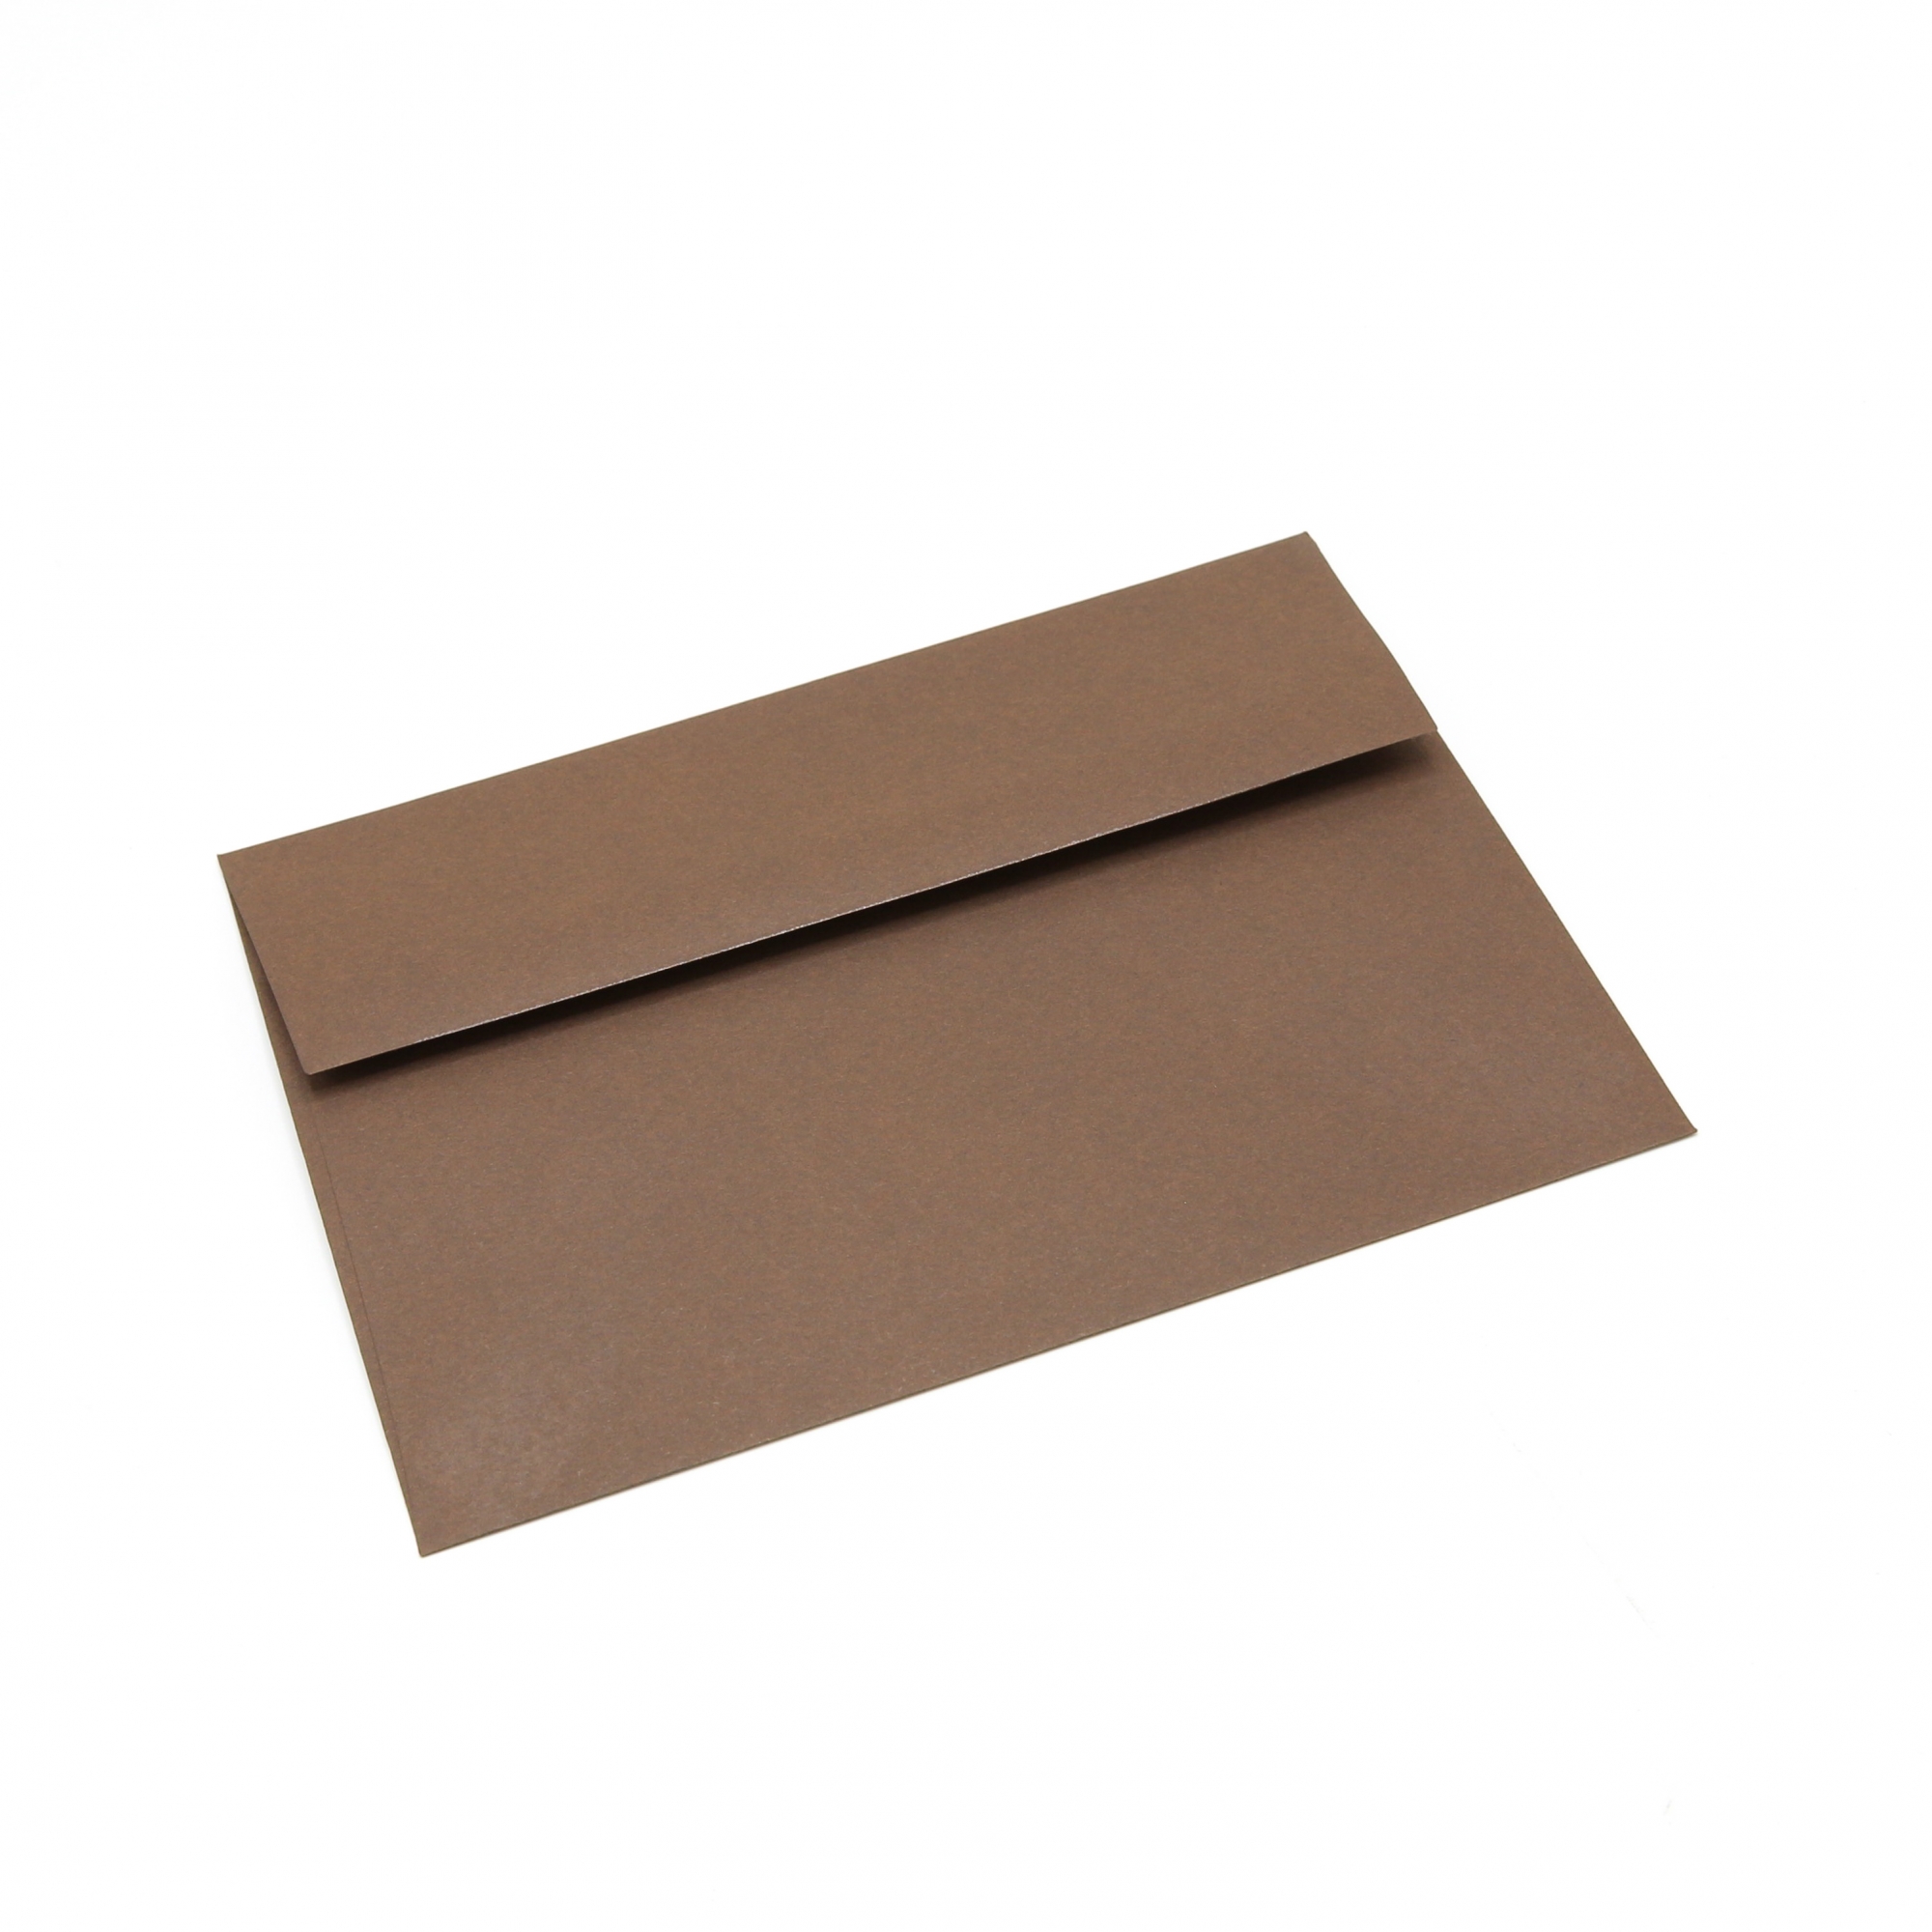 CLOSEOUTS Basis Premium Envelope A6 [4-3/4x6-1/2] Brown 50/pkg, Paper,  Envelopes, Cardstock & Wide format, Quick shipping nationwide